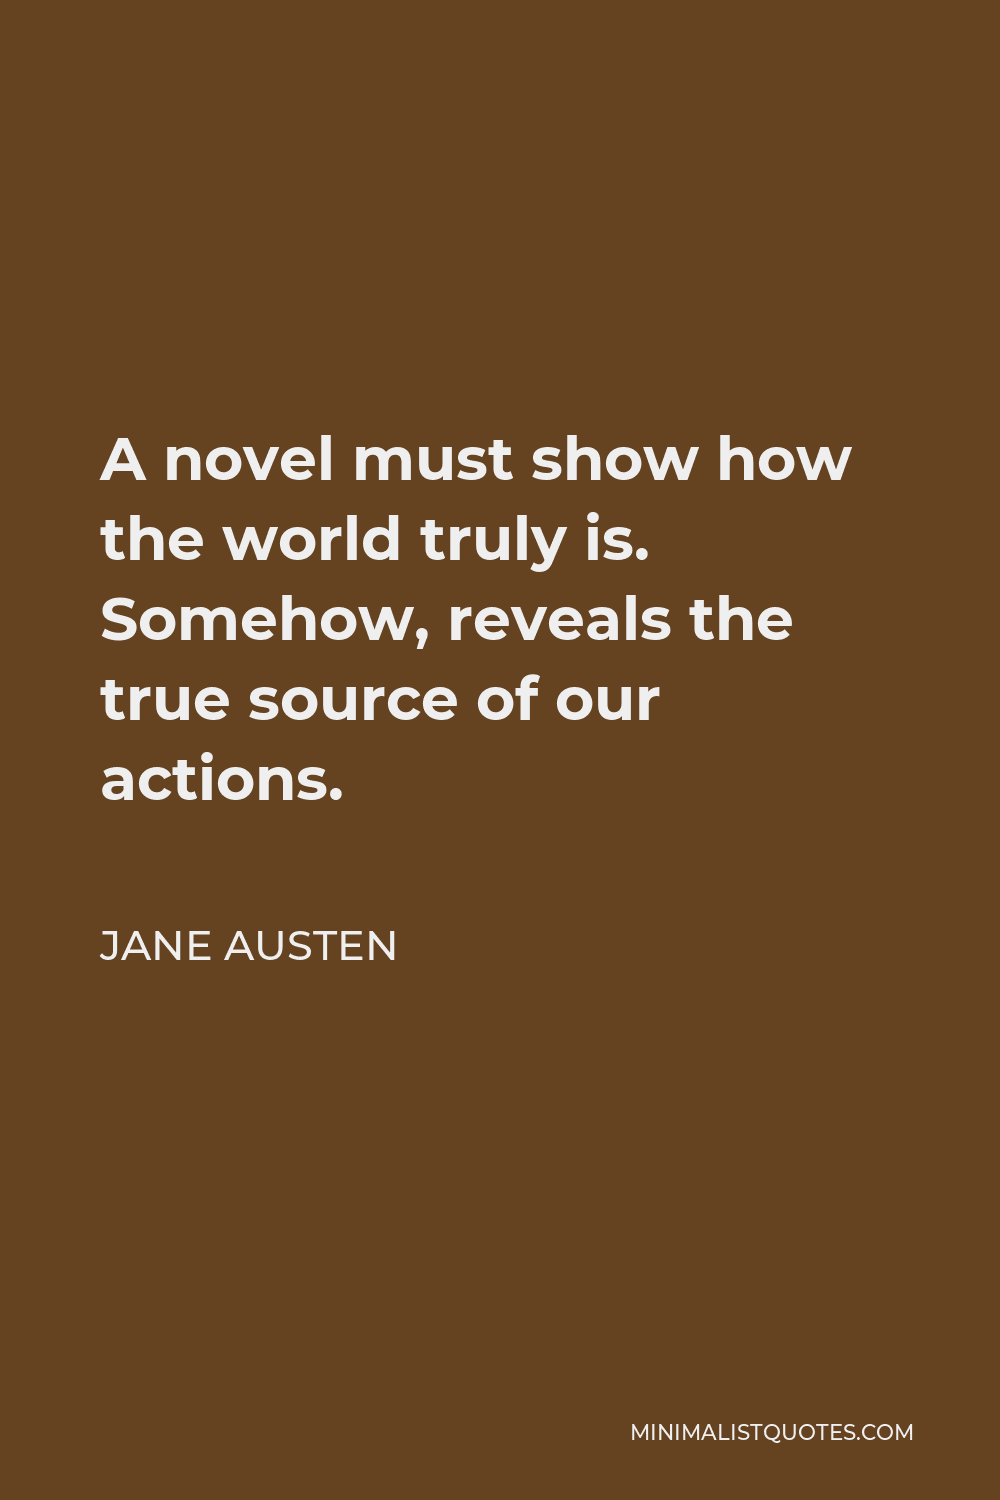 Jane Austen Quote - A novel must show how the world truly is. Somehow, reveals the true source of our actions.